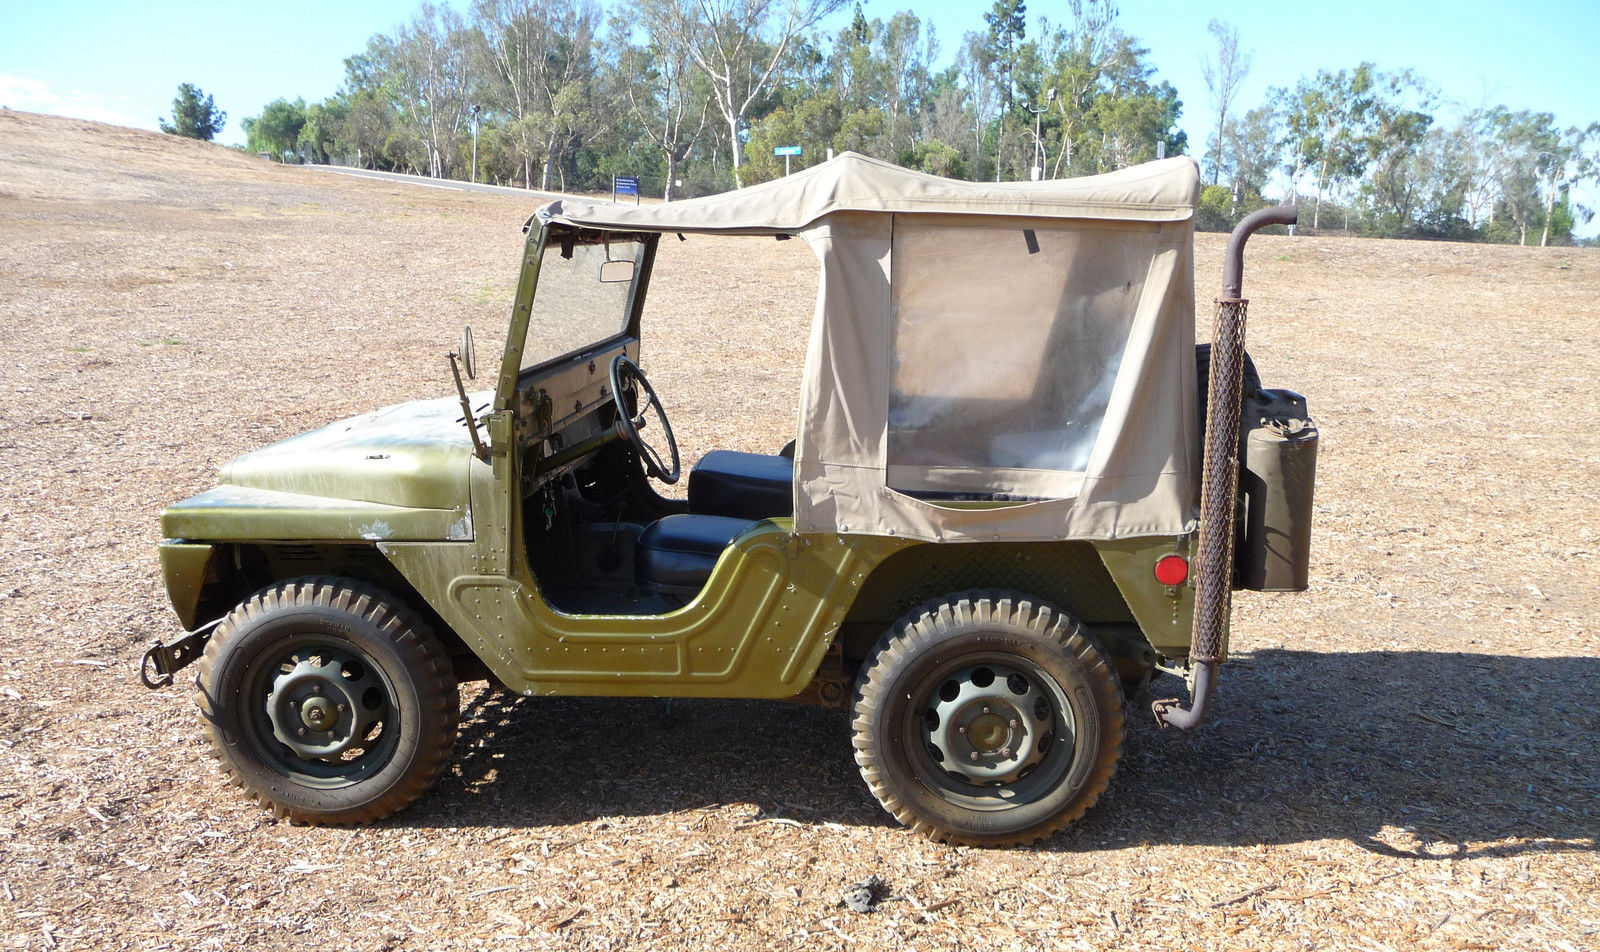 To keep its weight down the AMC Mighty Mite was the first American 4WD vehicle to use an aluminum body.